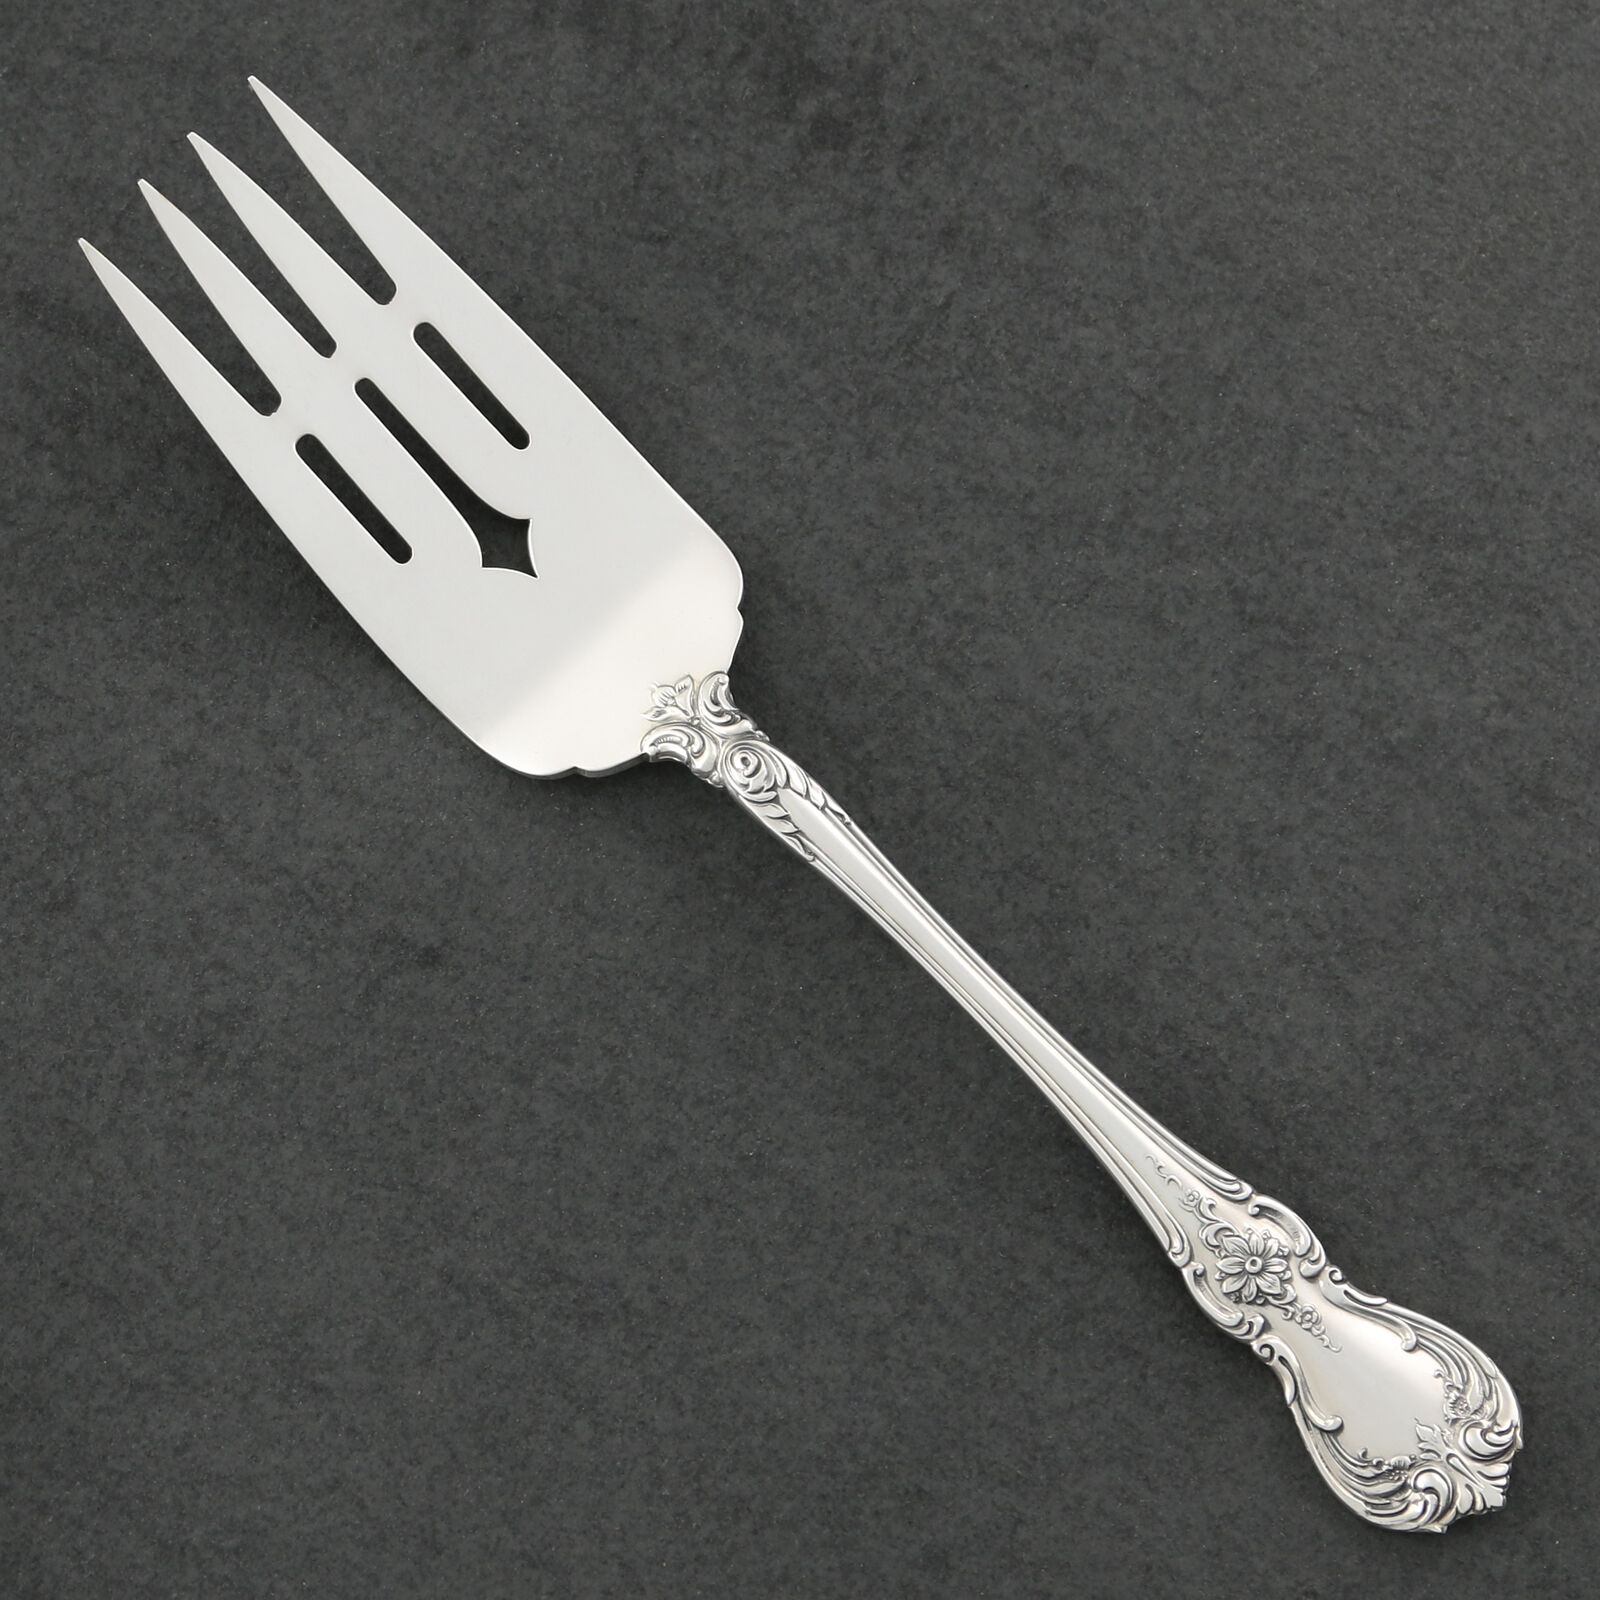 Towle OLD MASTER Sterling Silver 1942 Silverware CHOICE Flatware